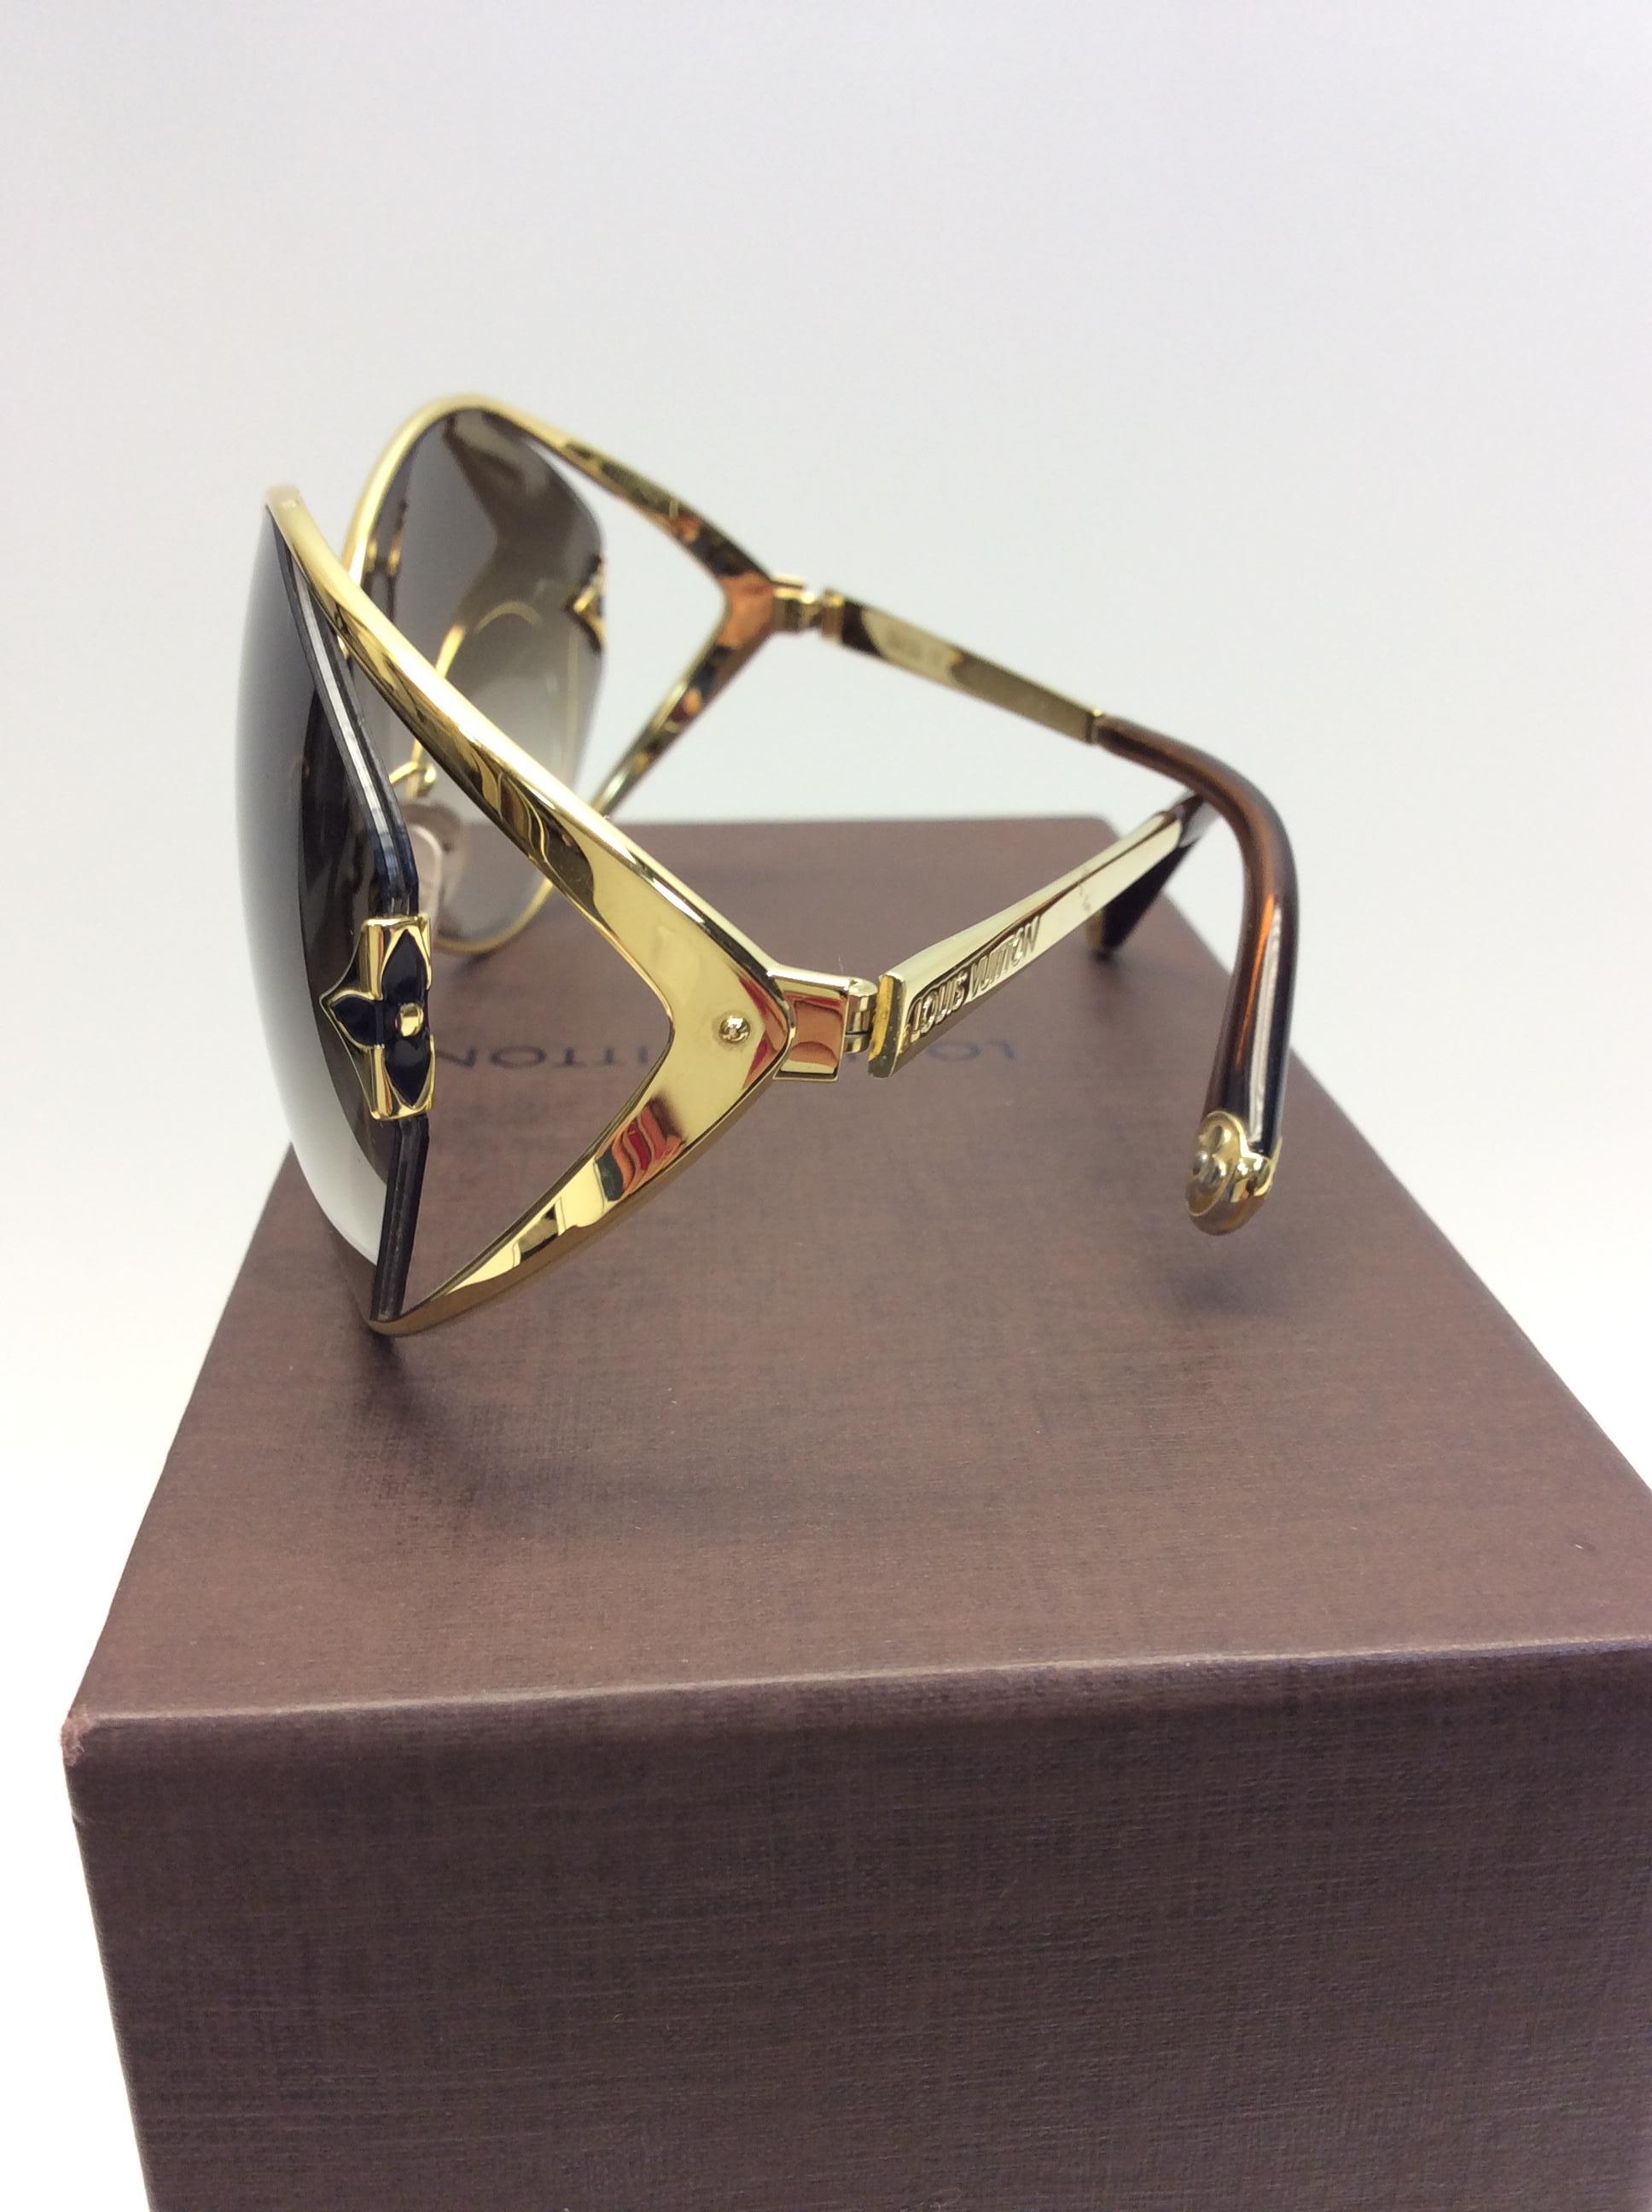 Louis Vuitton Gold Tone Sunglasses
$399
Made in Italy
6” across 
5.5” back